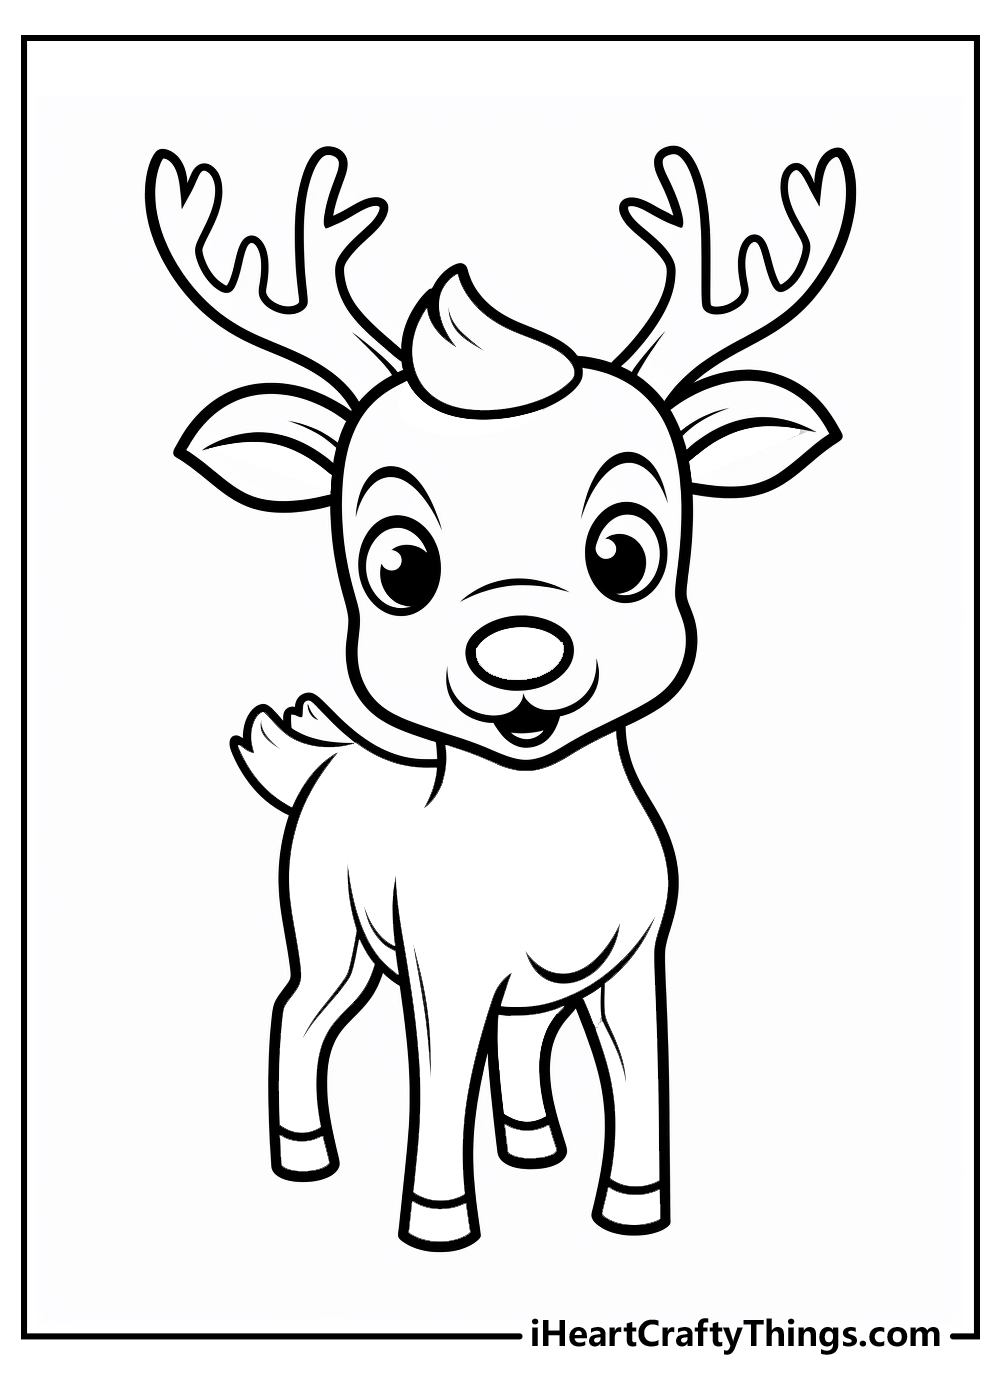 rudolph coloring sheet free download